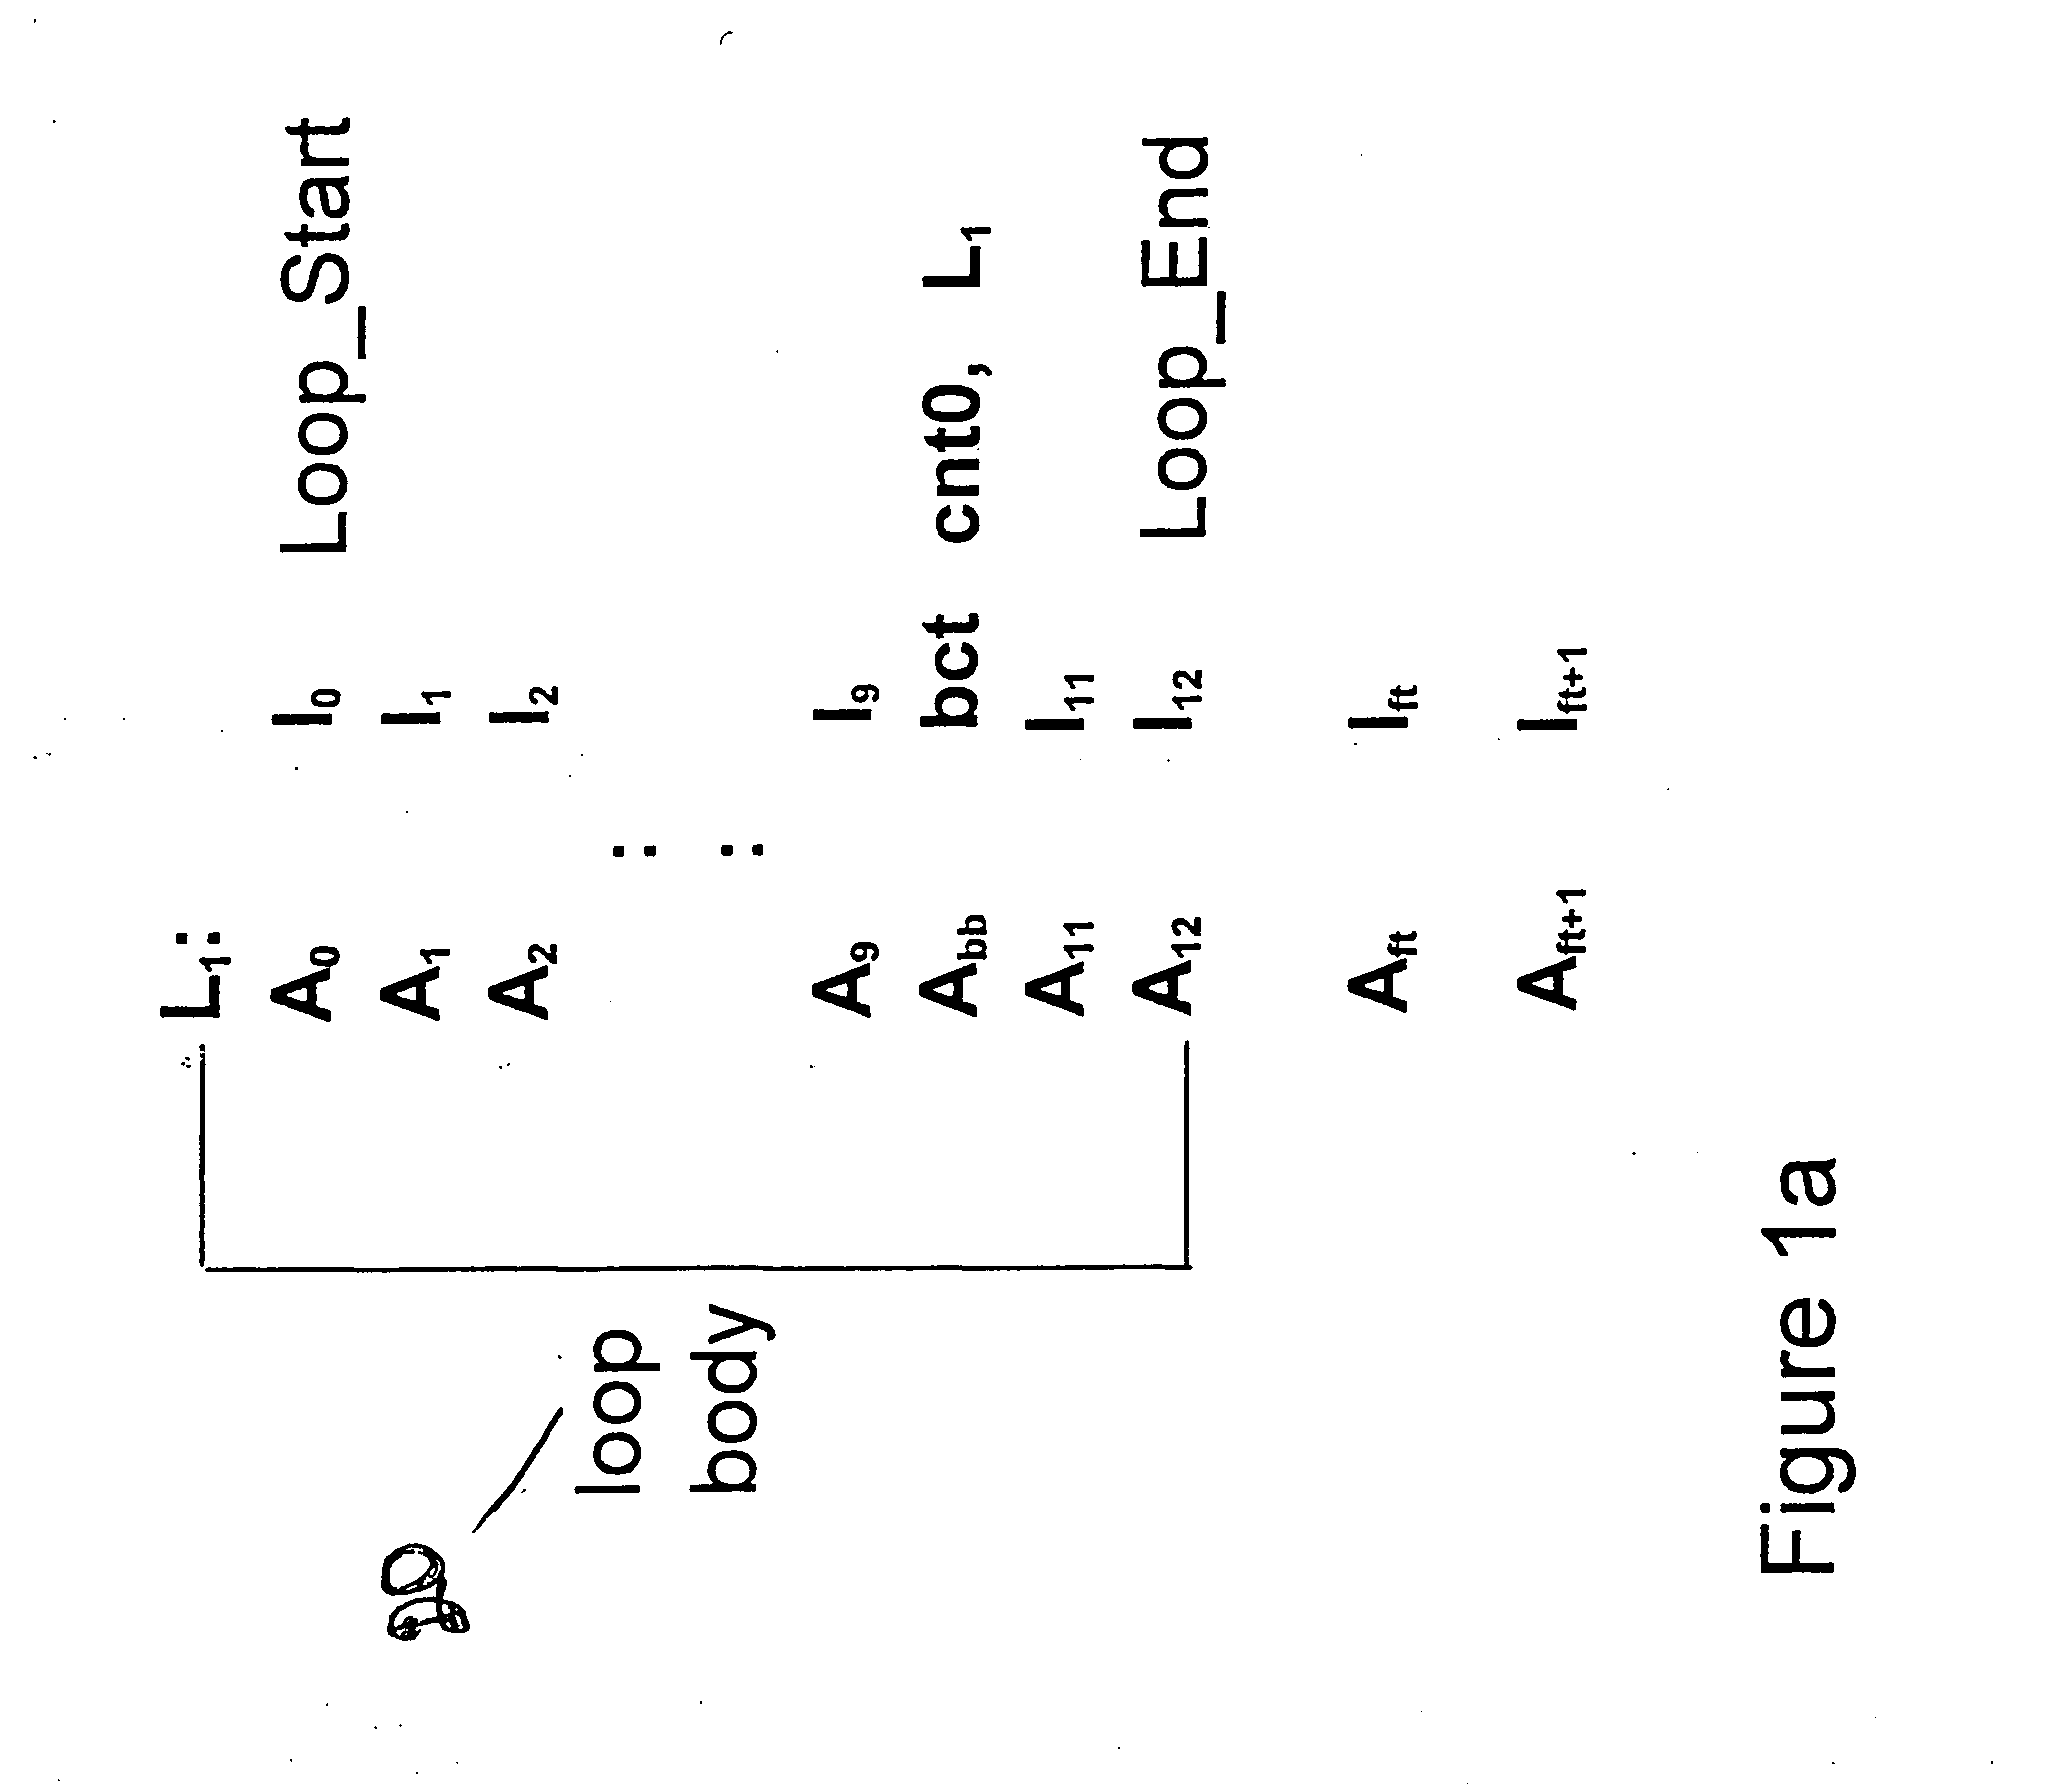 System and method for instruction memory storage and processing based on backwards branch control information